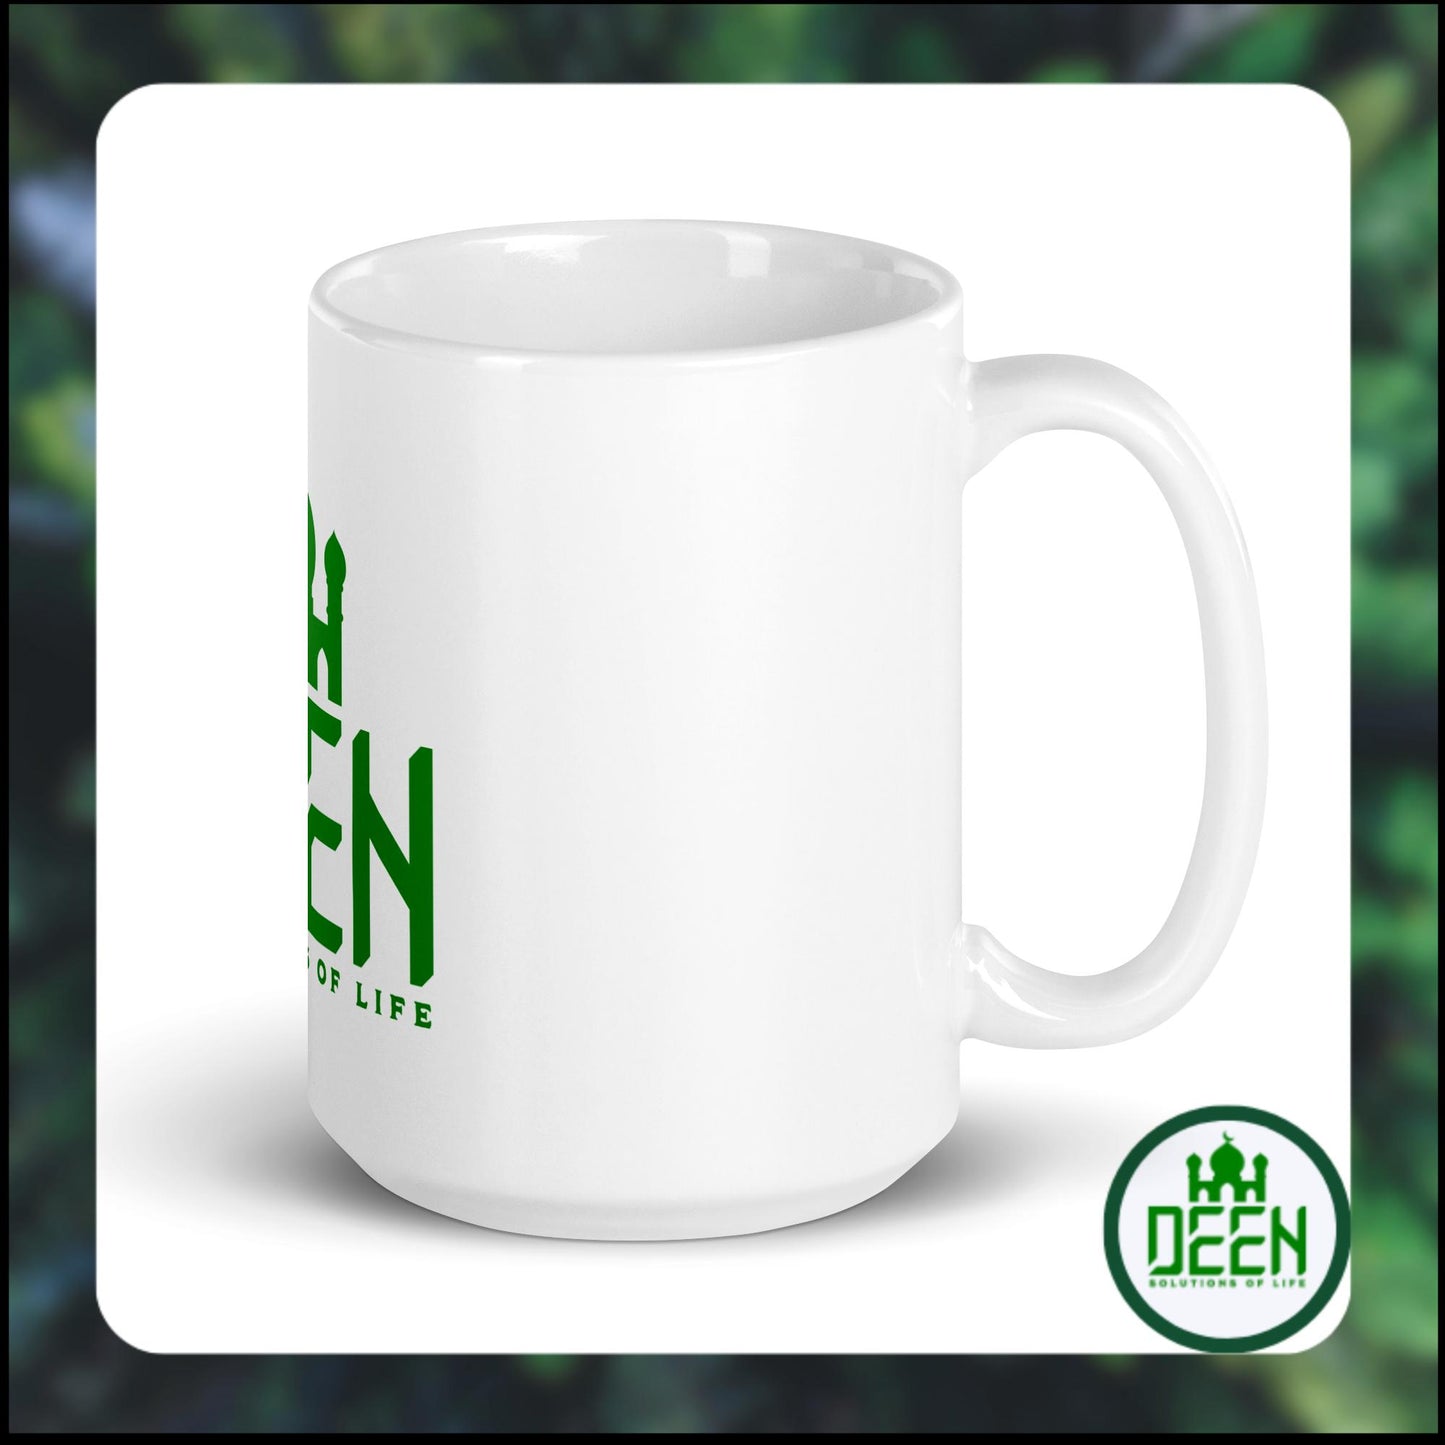 Deen Solutions of life White glossy mug